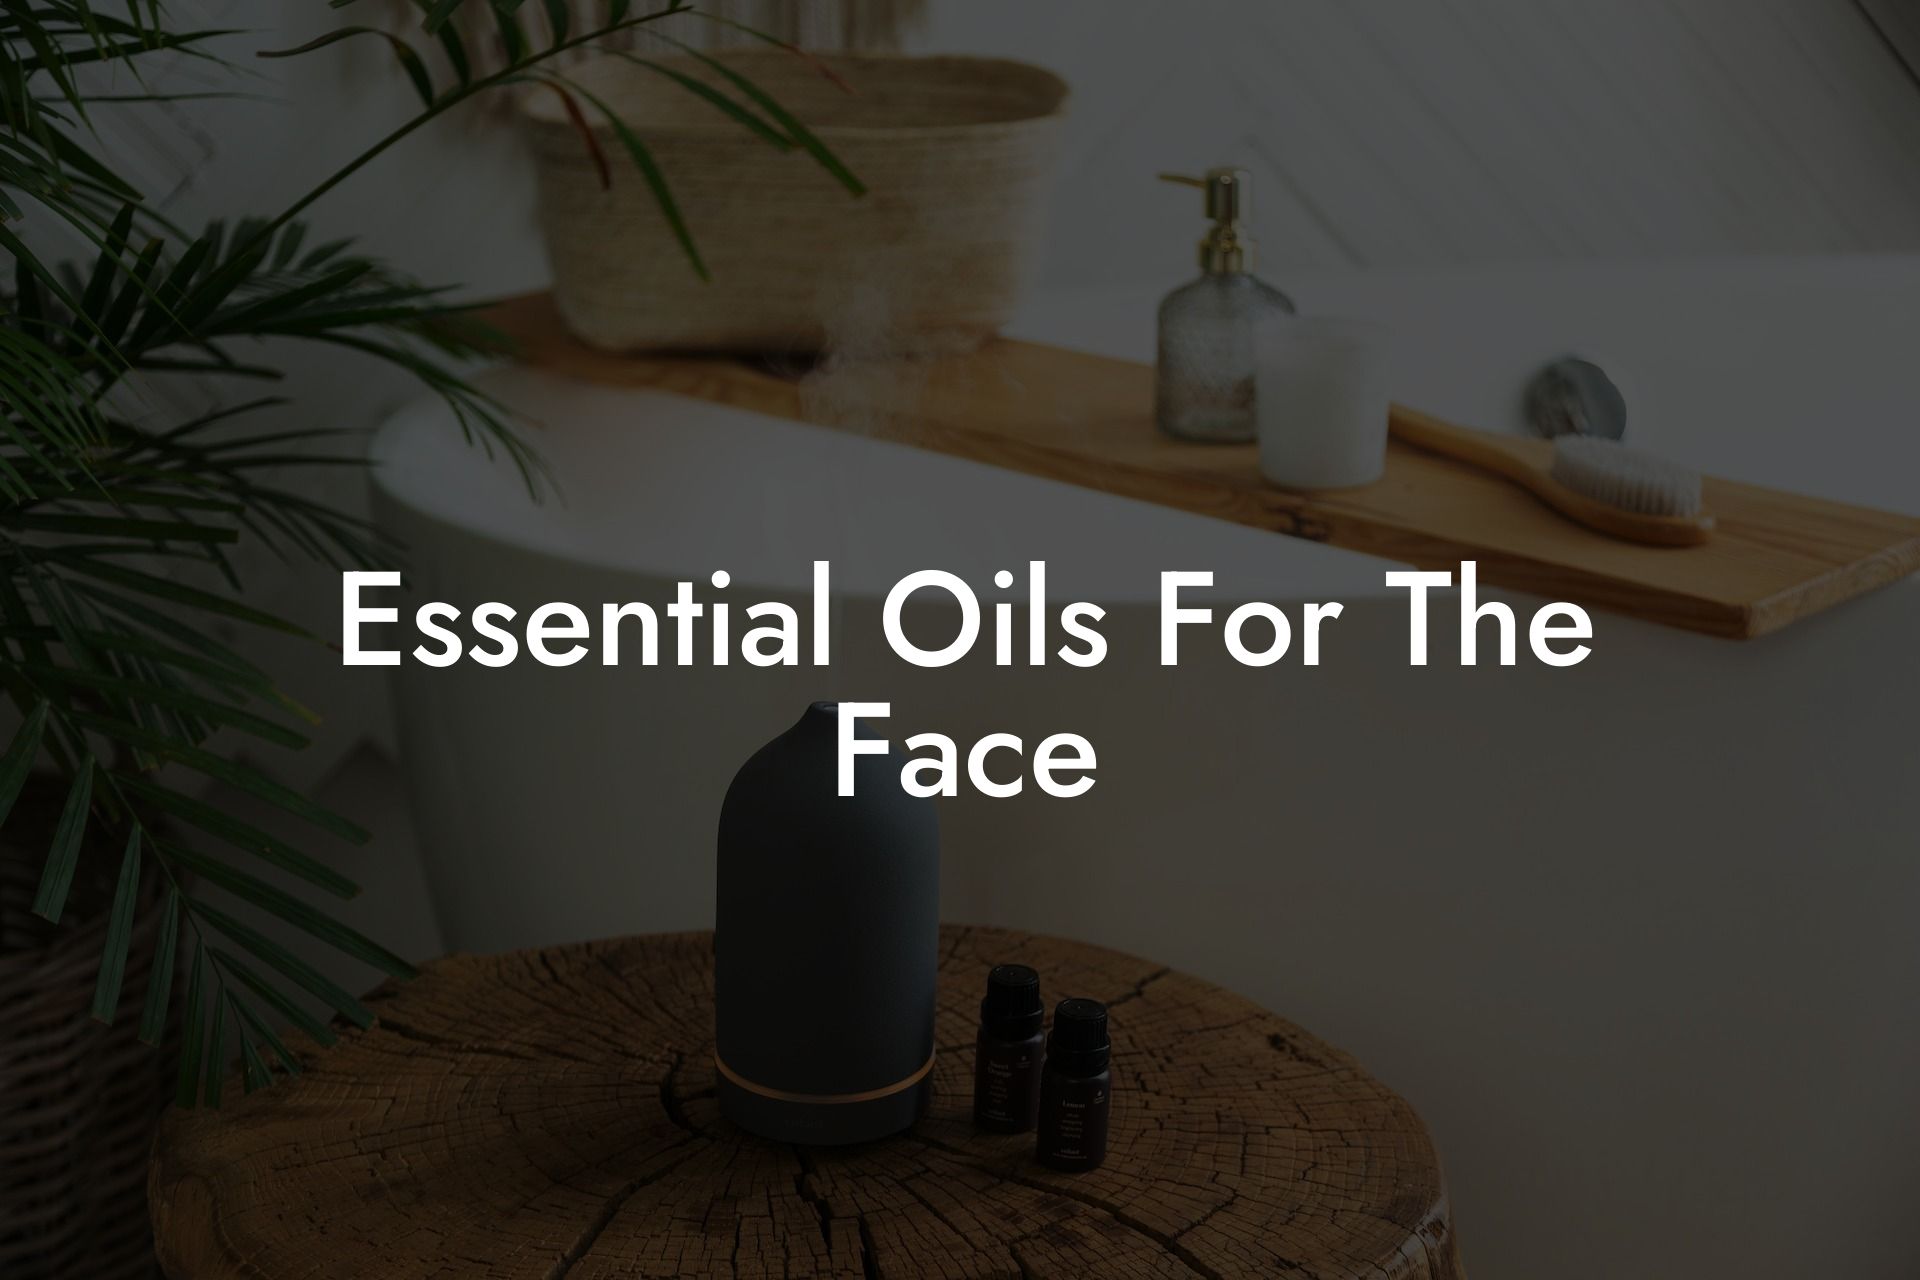 Essential Oils For The Face